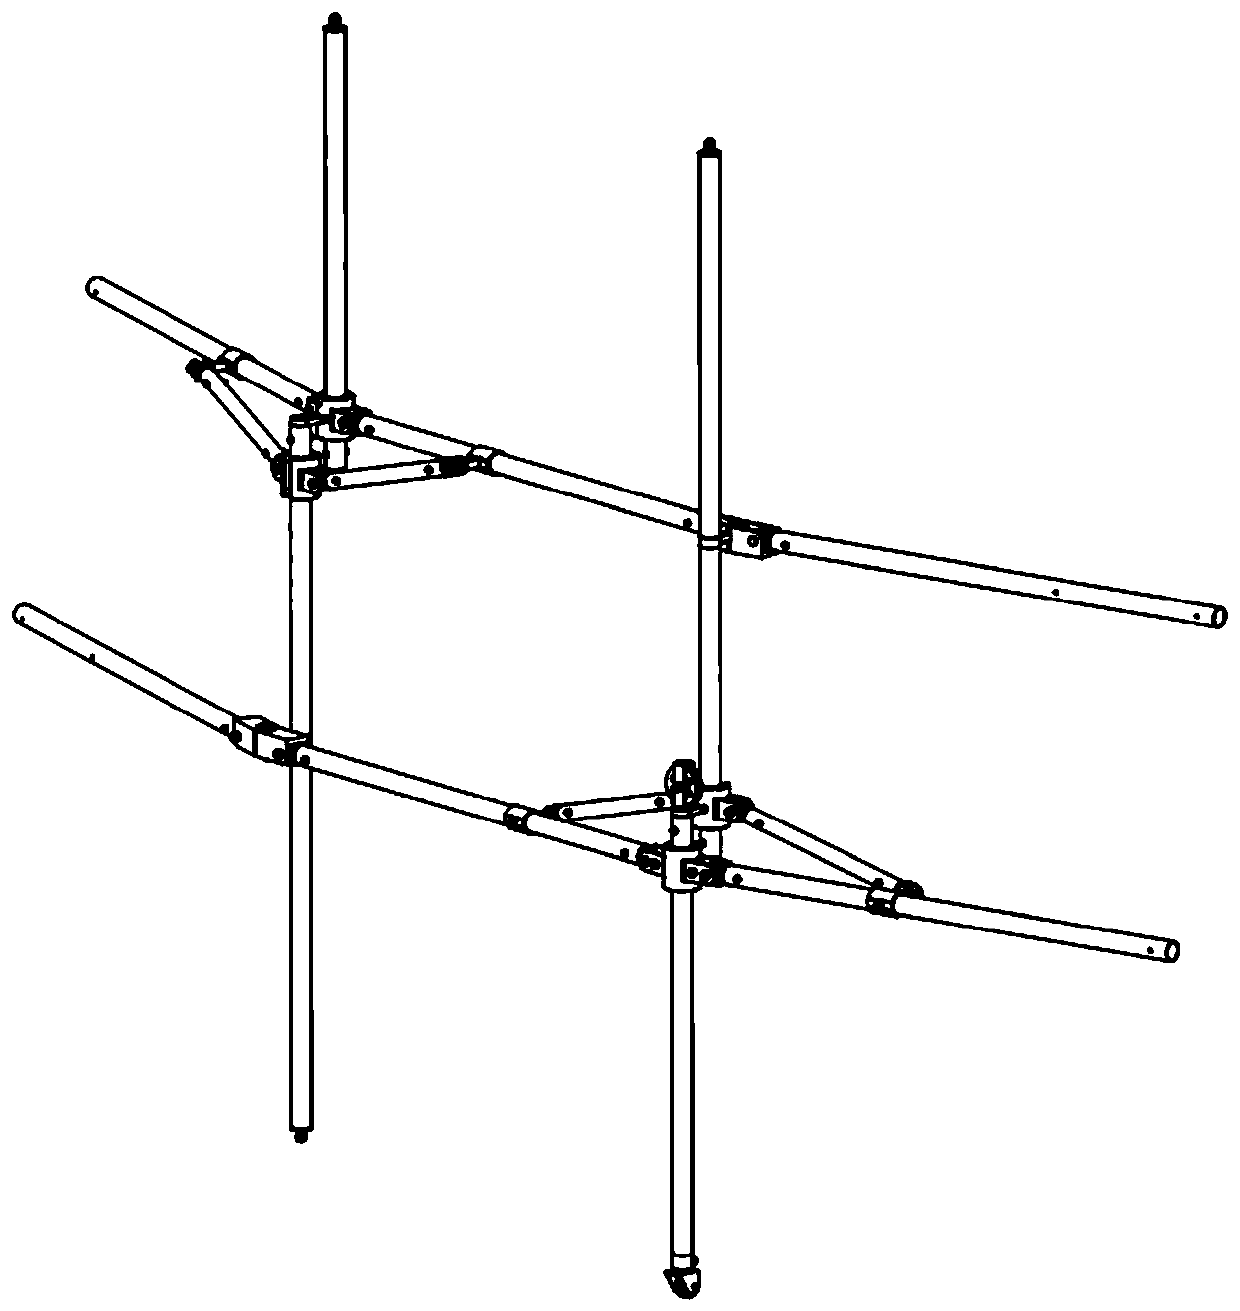 Reticulated annular deployable antenna and antenna truss